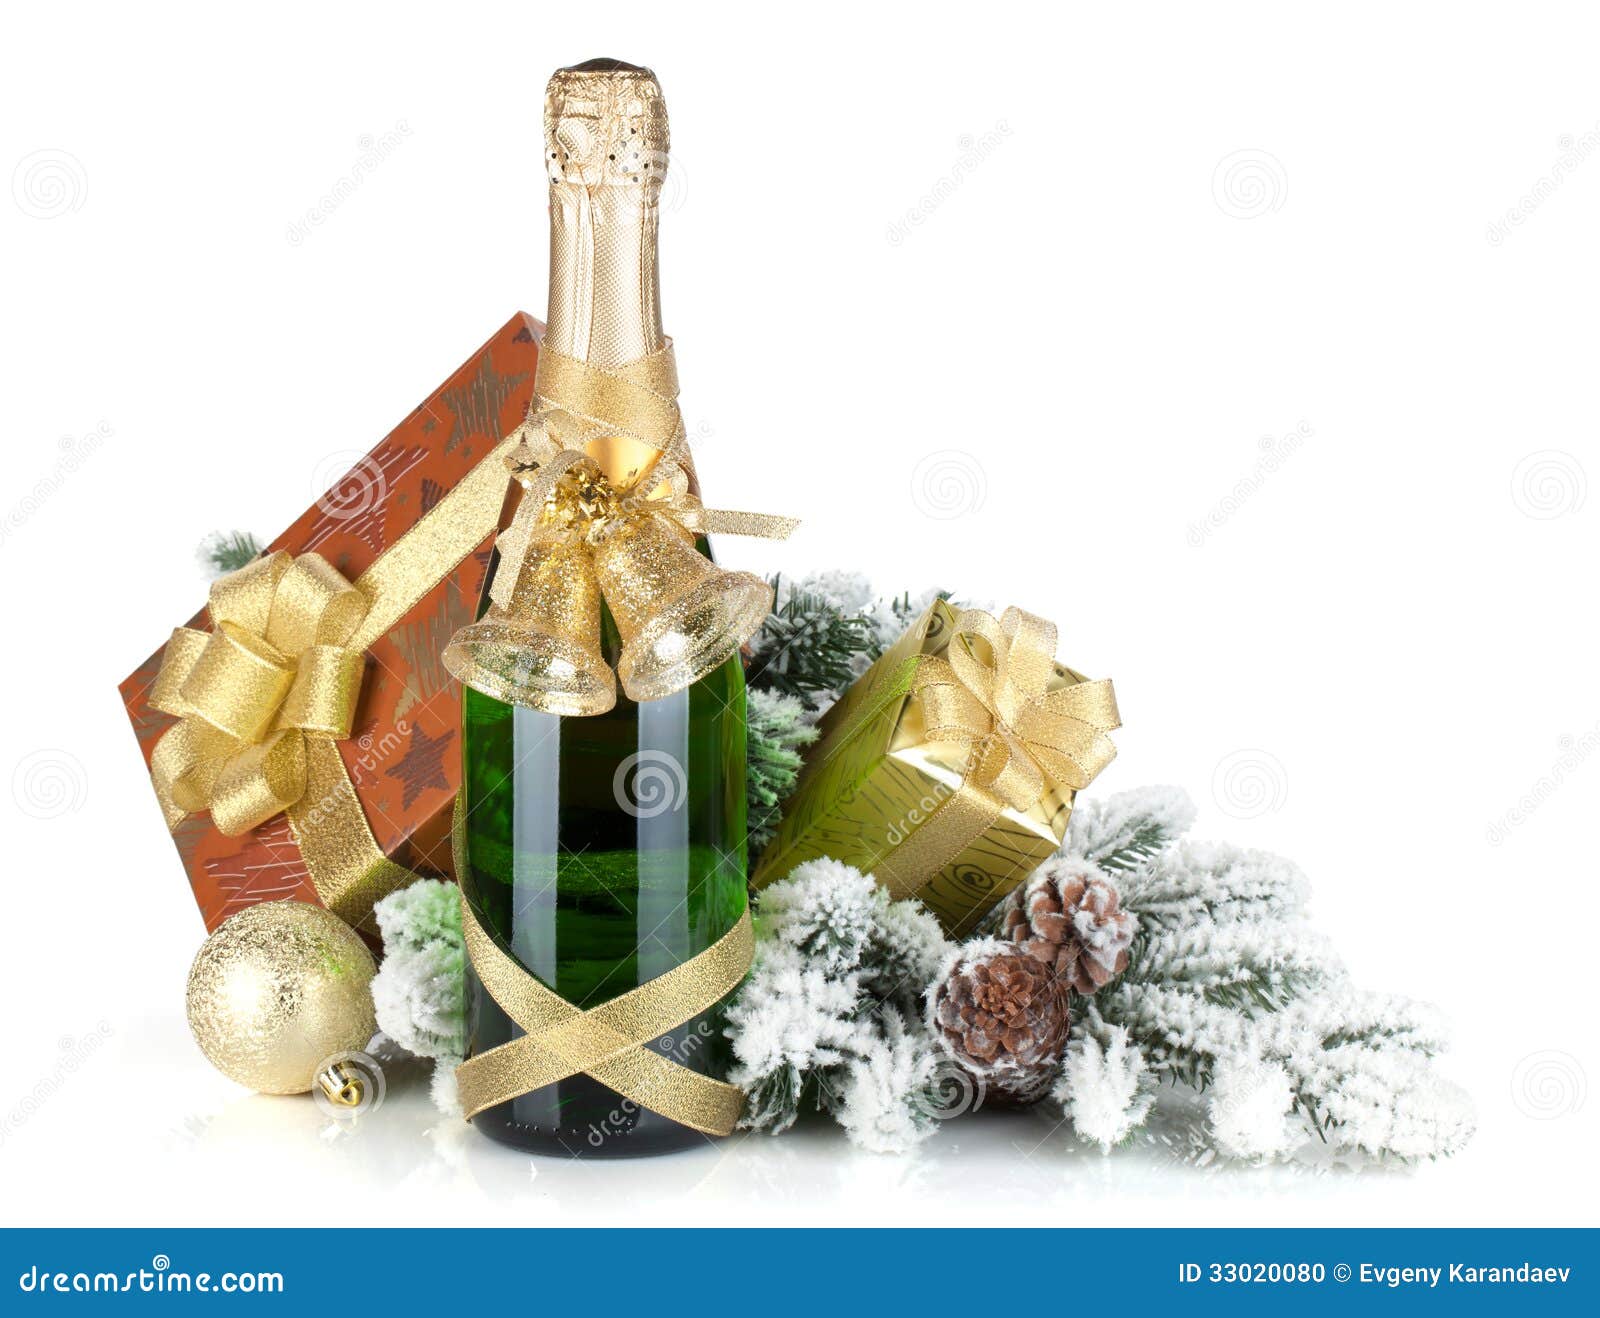 Champagne Bottle, Christmas Gift Box, Decor And Fir Tree Stock Photo - Image of romantic ...